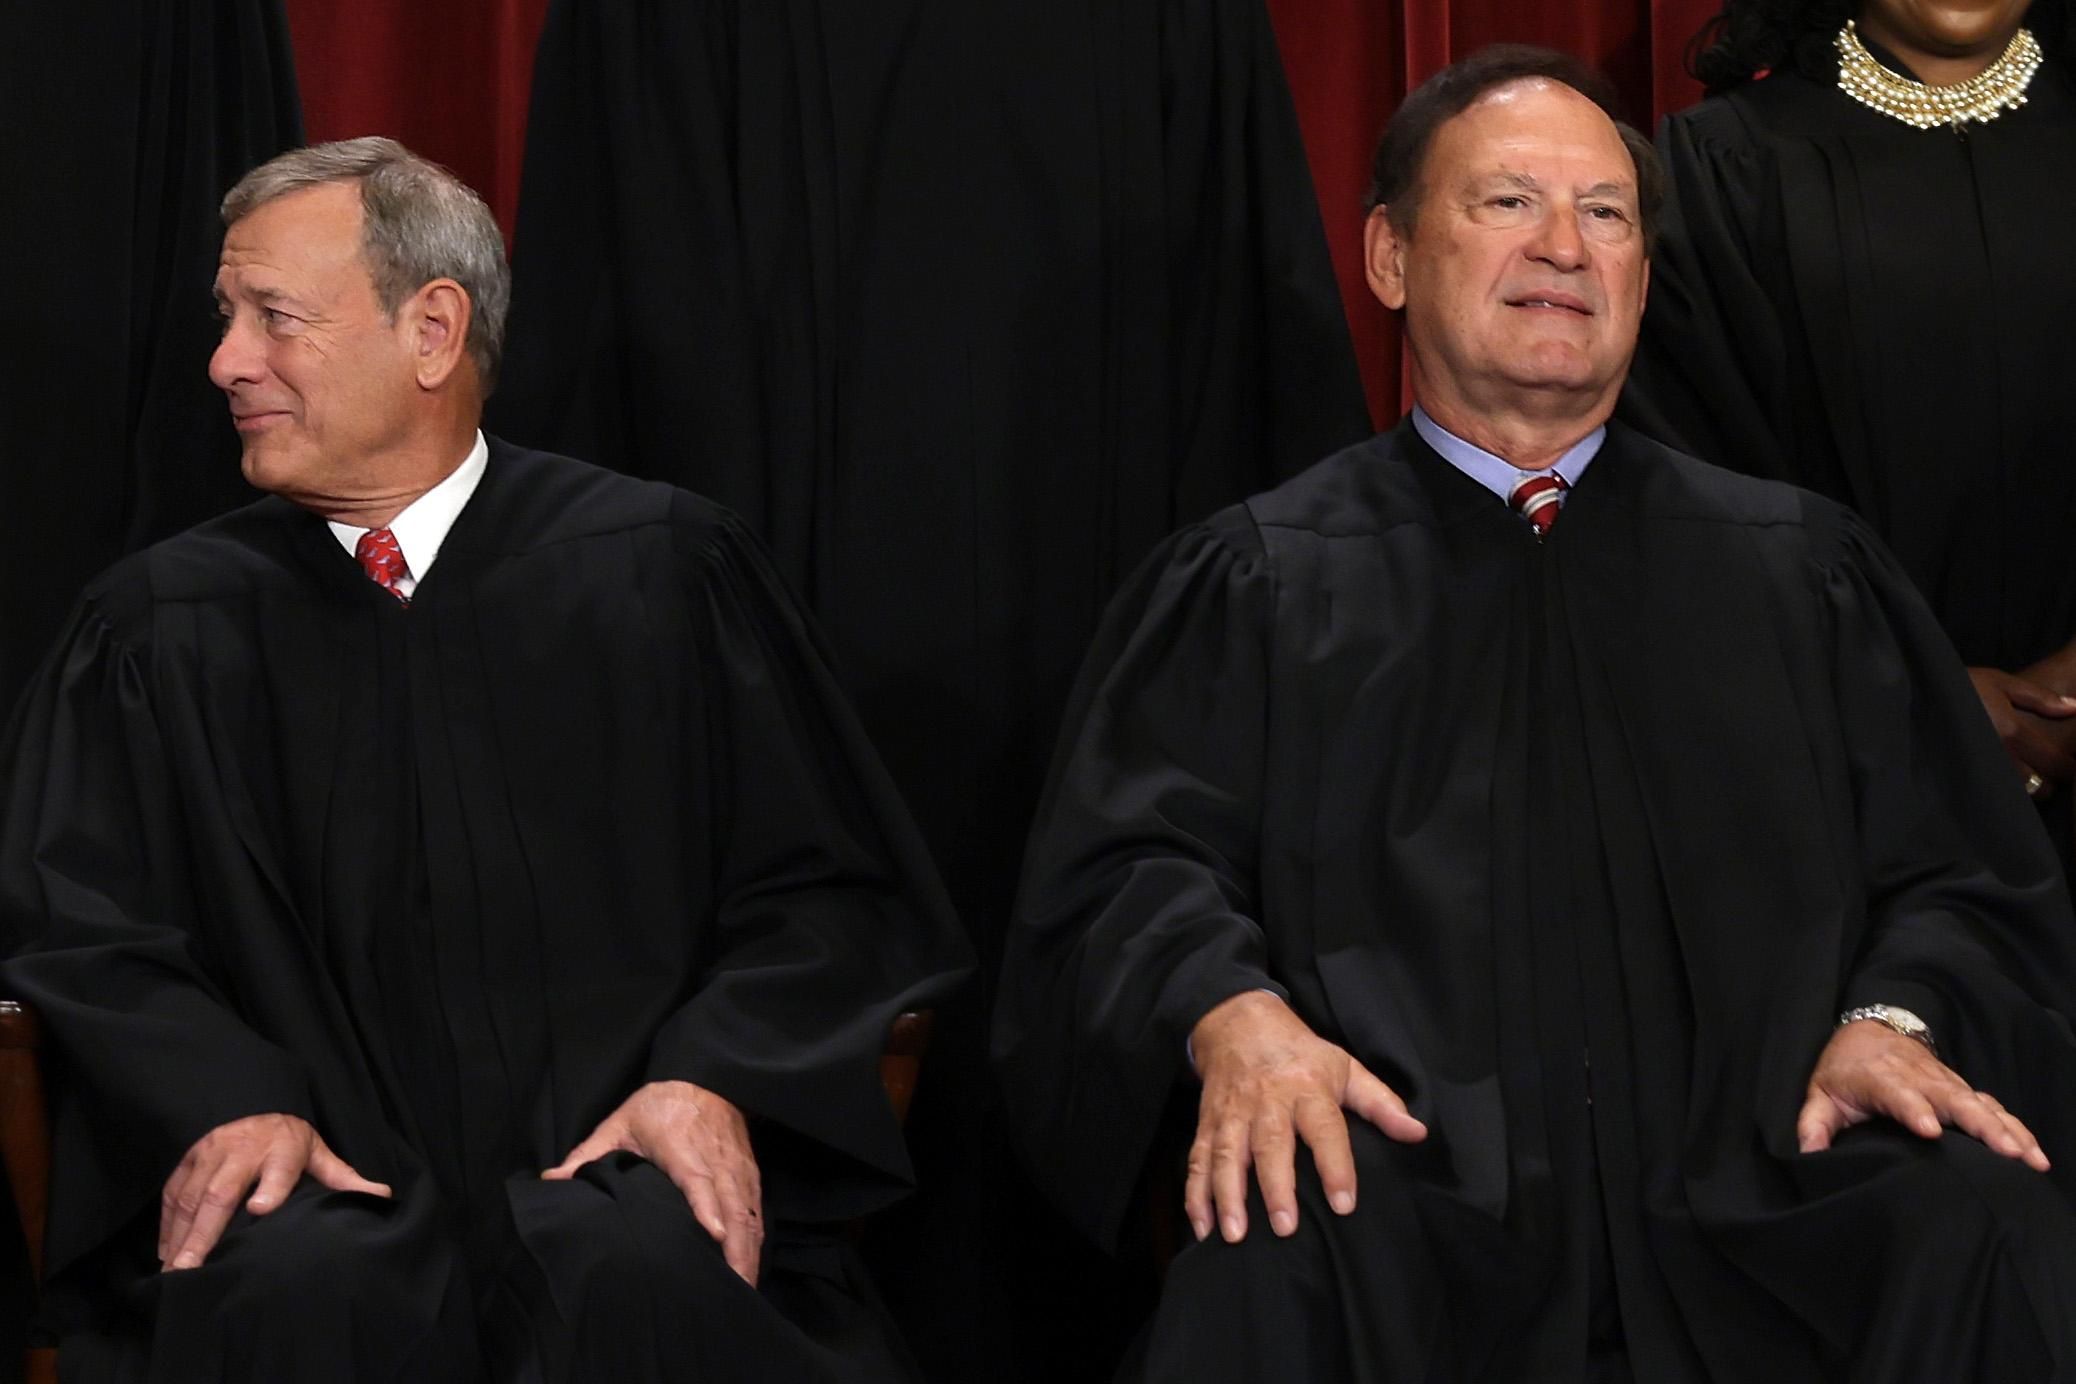 Justices John Roberts and Samuel Alito